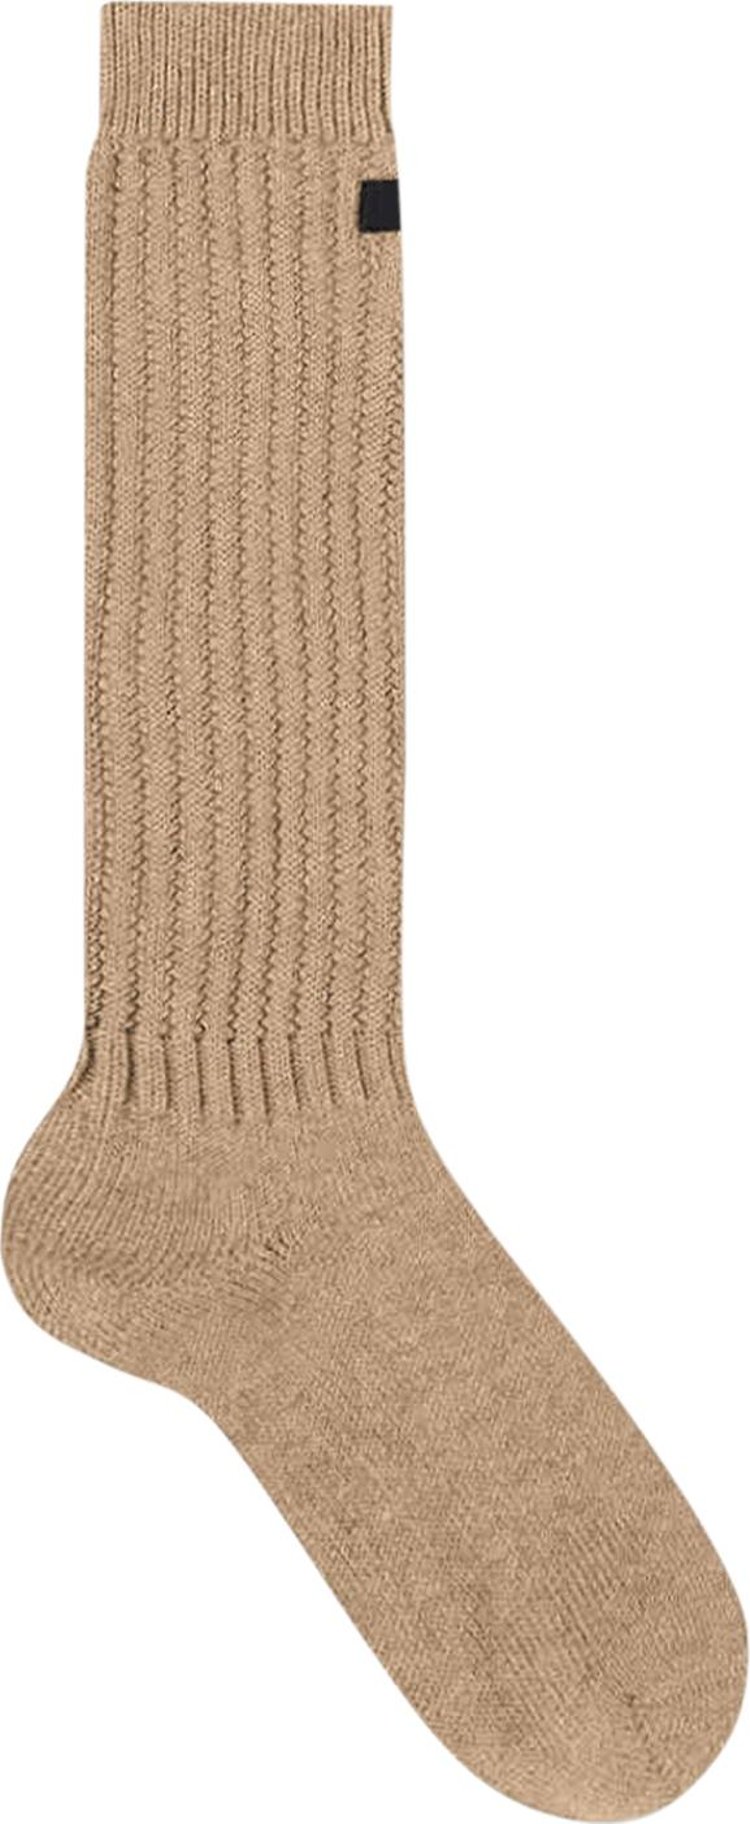 Fear of God 7th Collection Socks 'Beige'